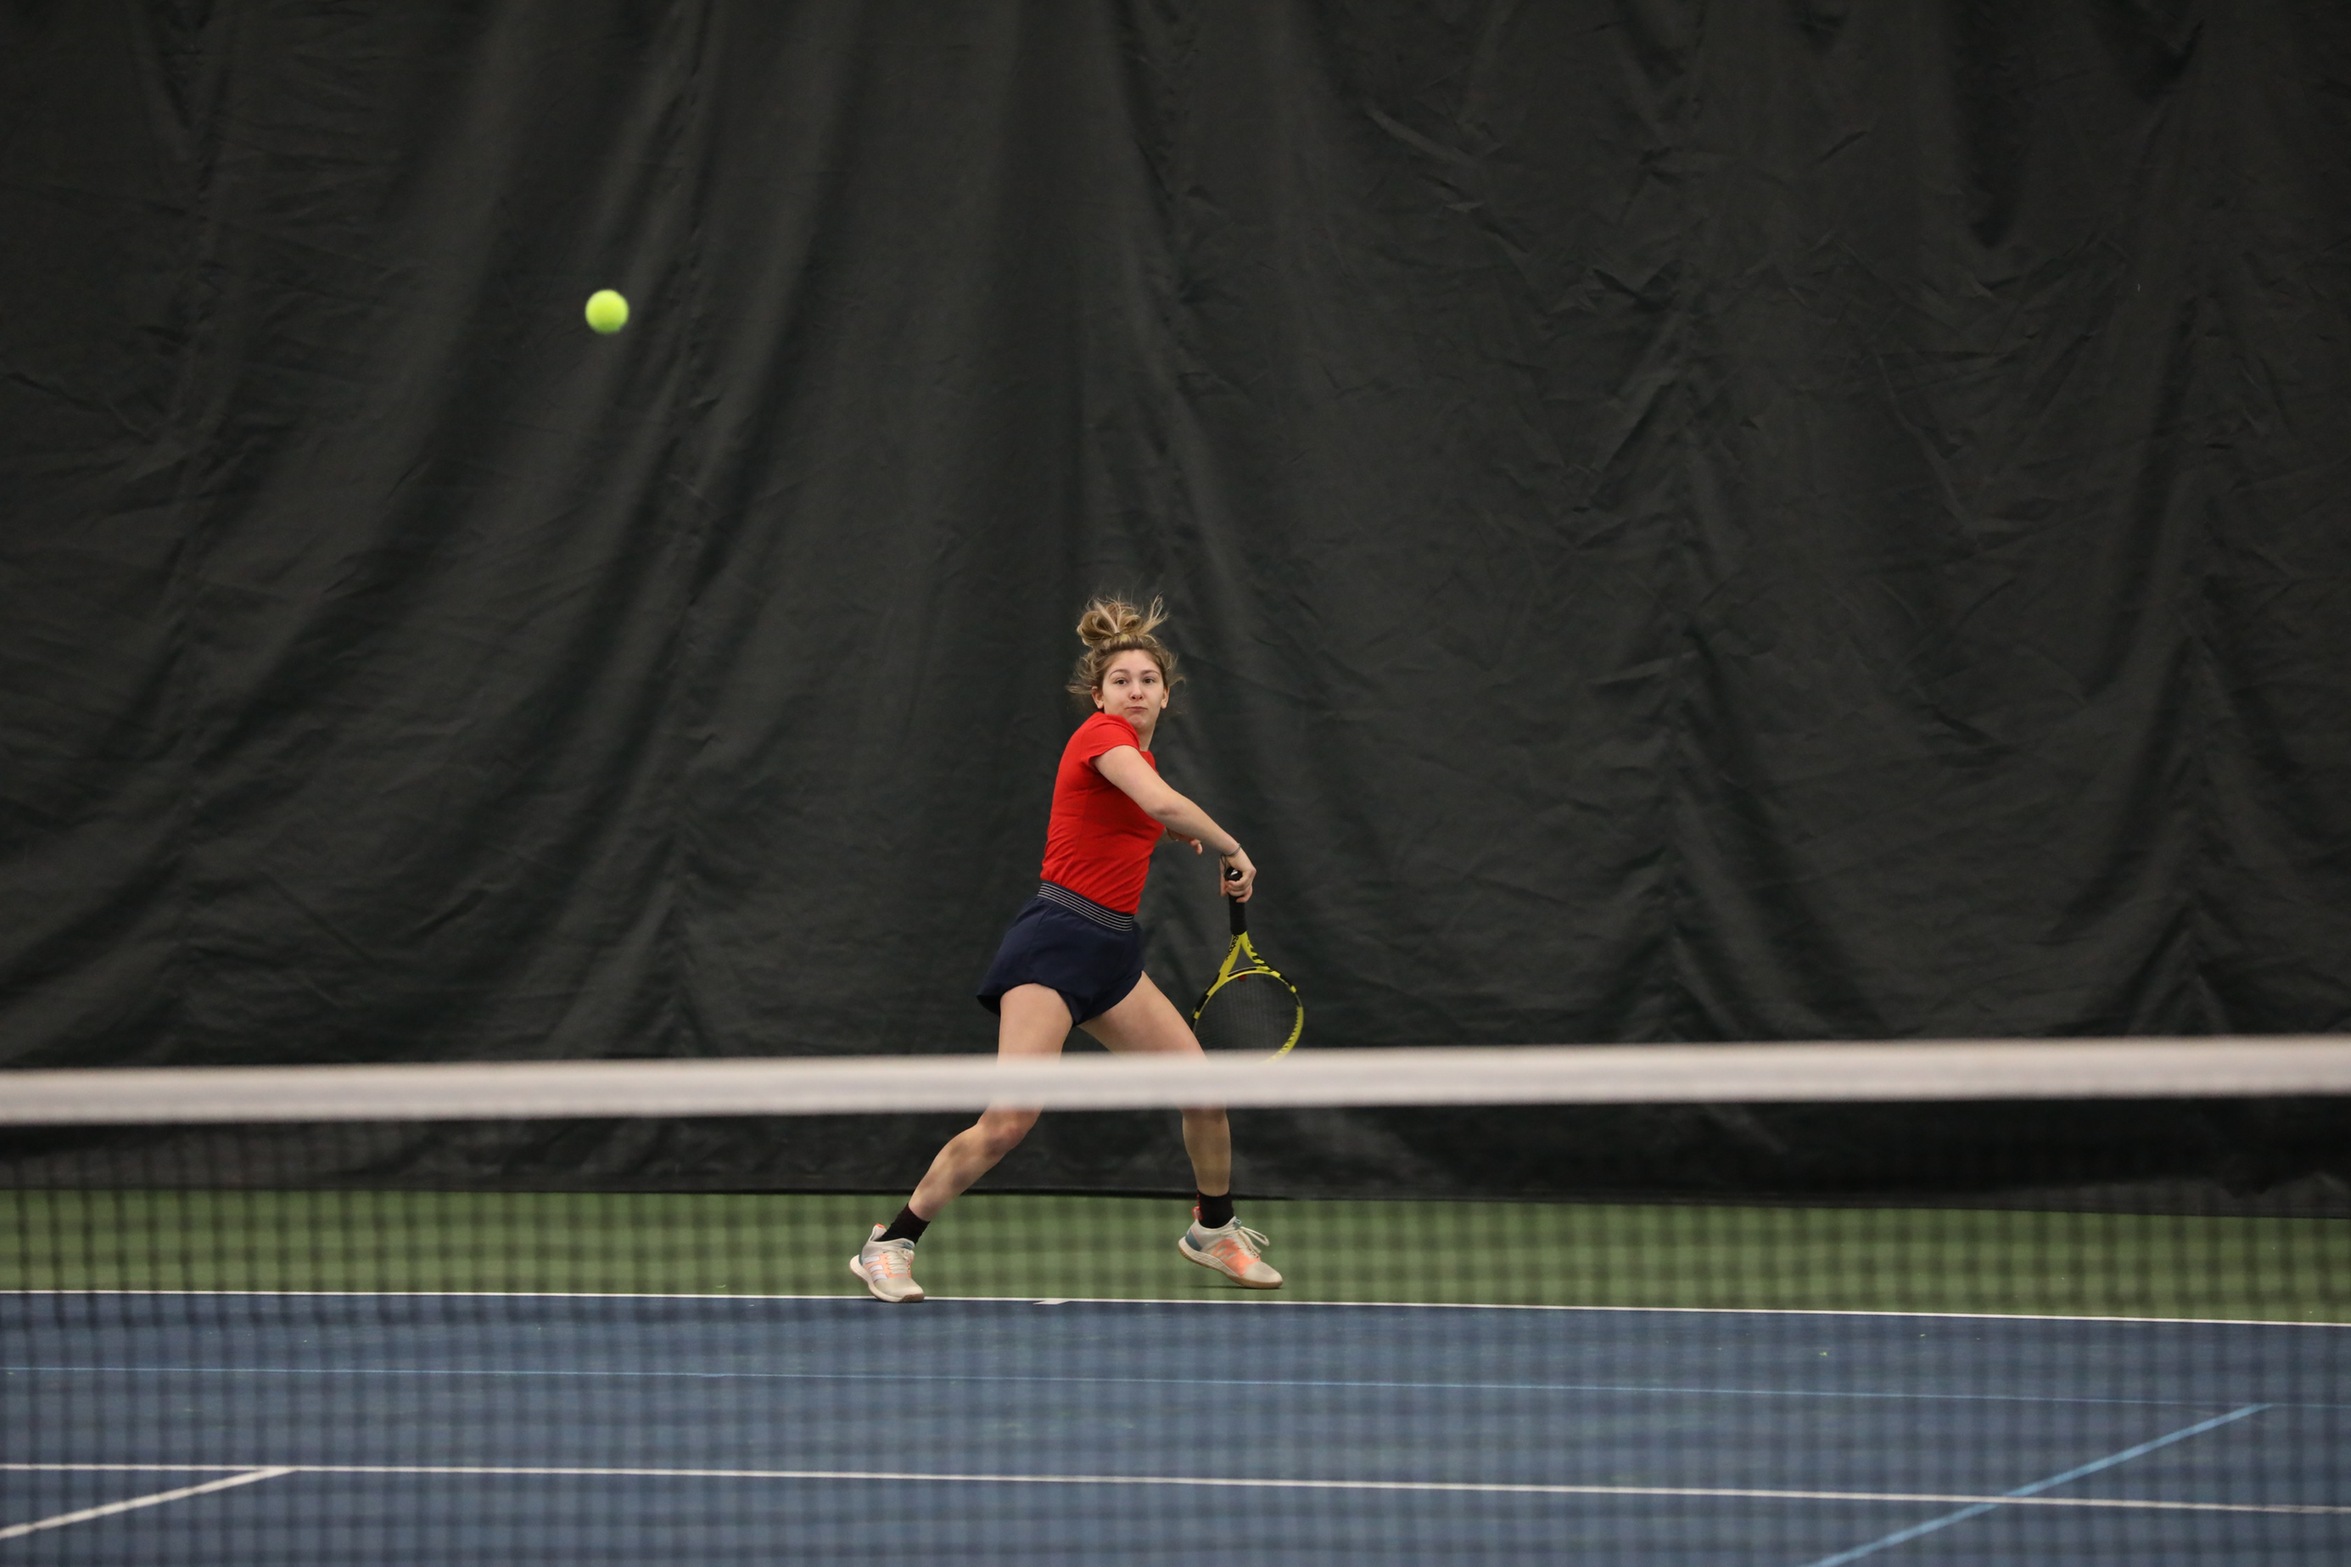 Tennis Falls in Clinch Match at PNW to Open GLIAC Competition